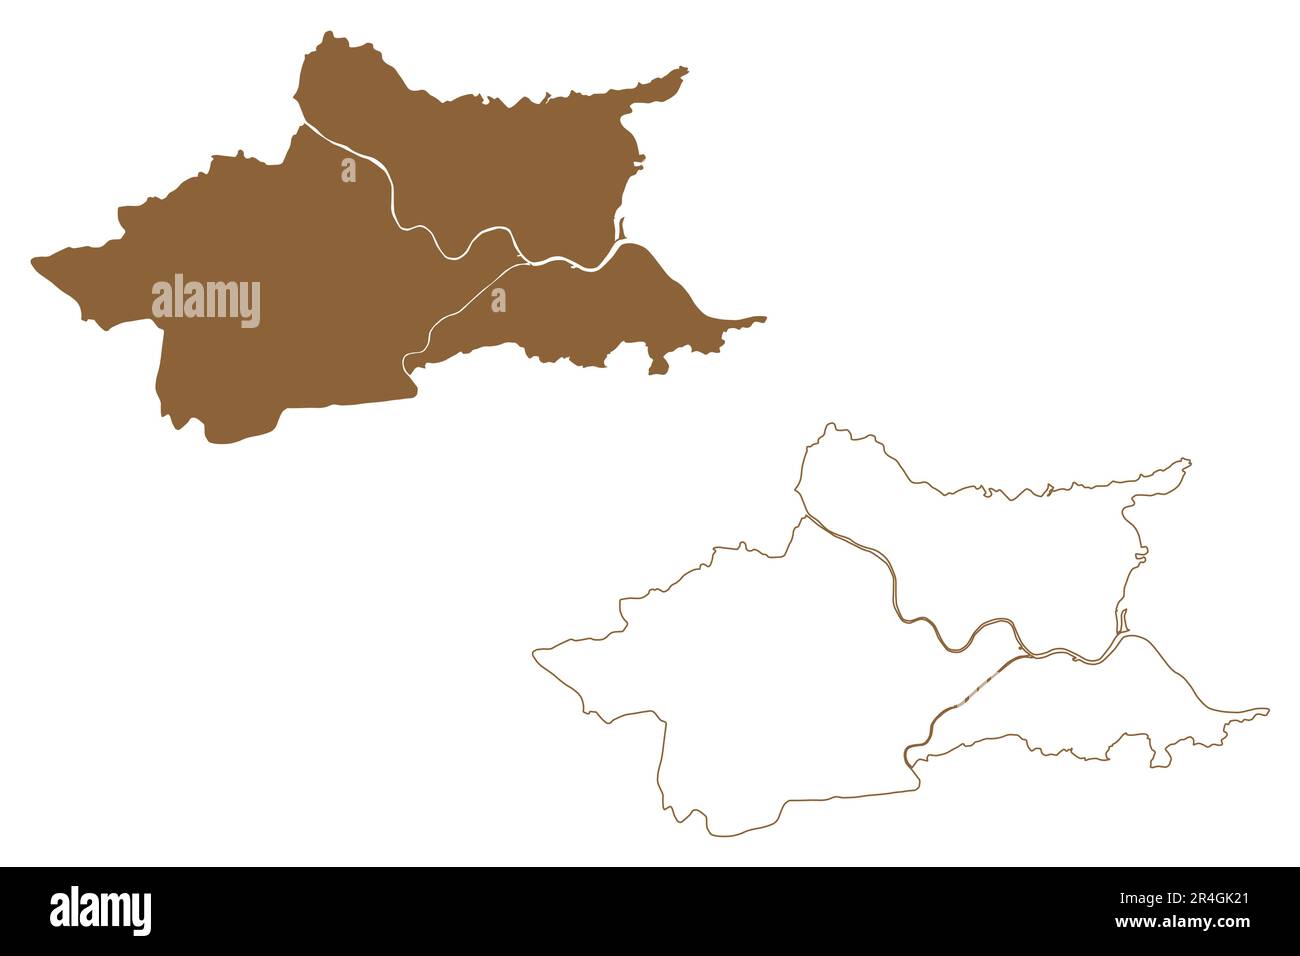 Villach city and district (Republic of Austria or Österreich, Carinthia or Kärnten state) map vector illustration, scribble sketch map Stock Vector